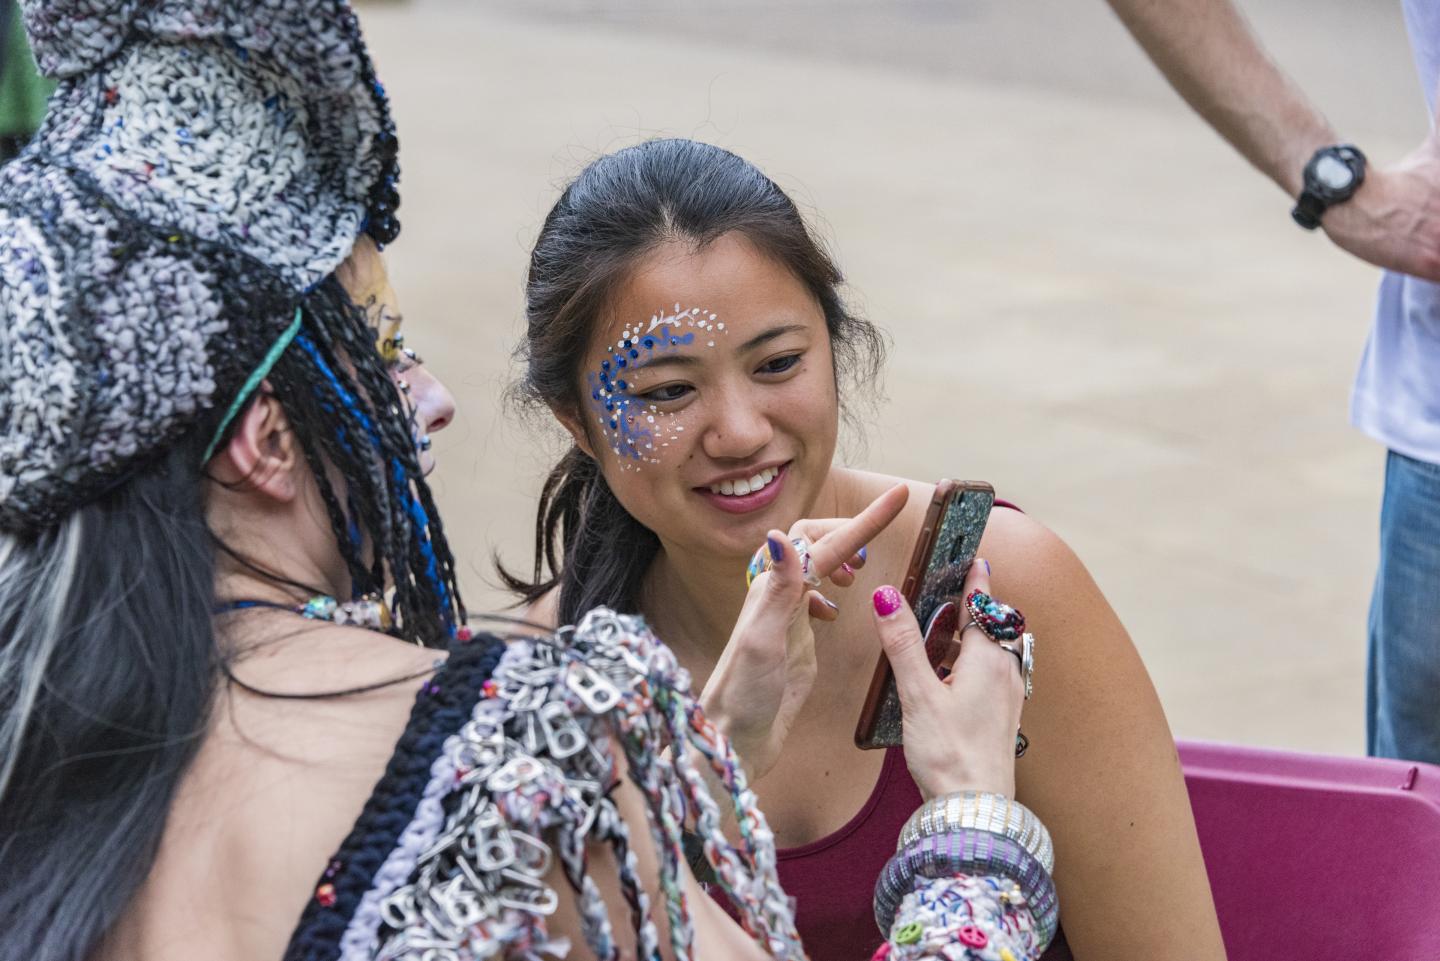 A young person with their face painted looks at an image of their face